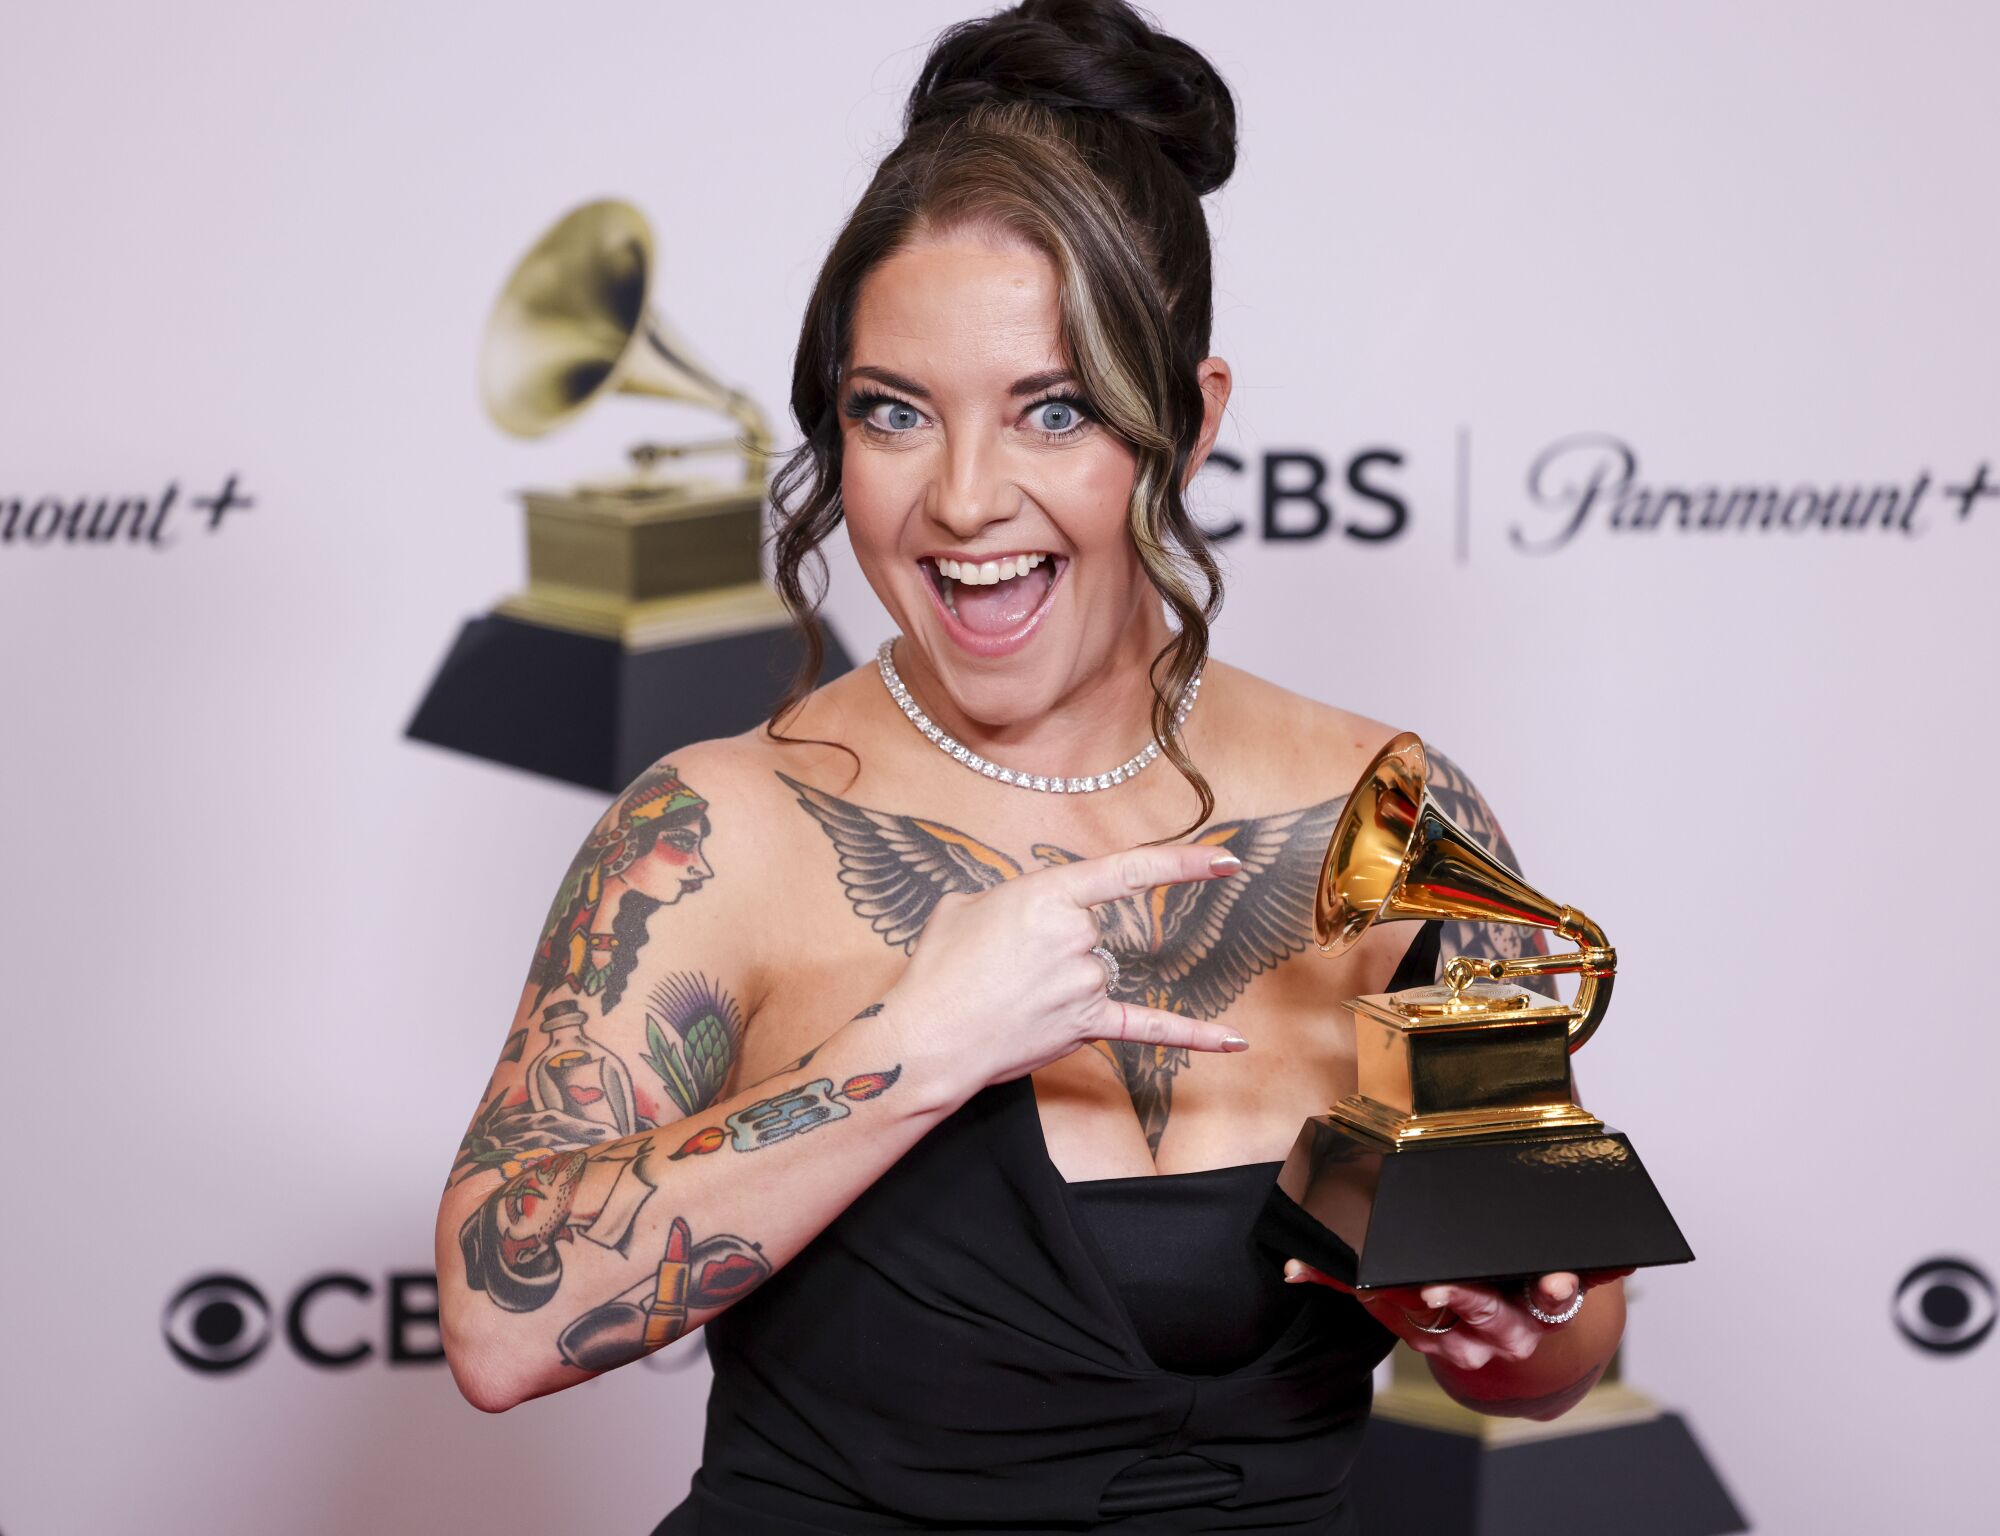 Ashley McBryde Winner at the 65th Grammy Awards held at the Crytpo.com Arena.